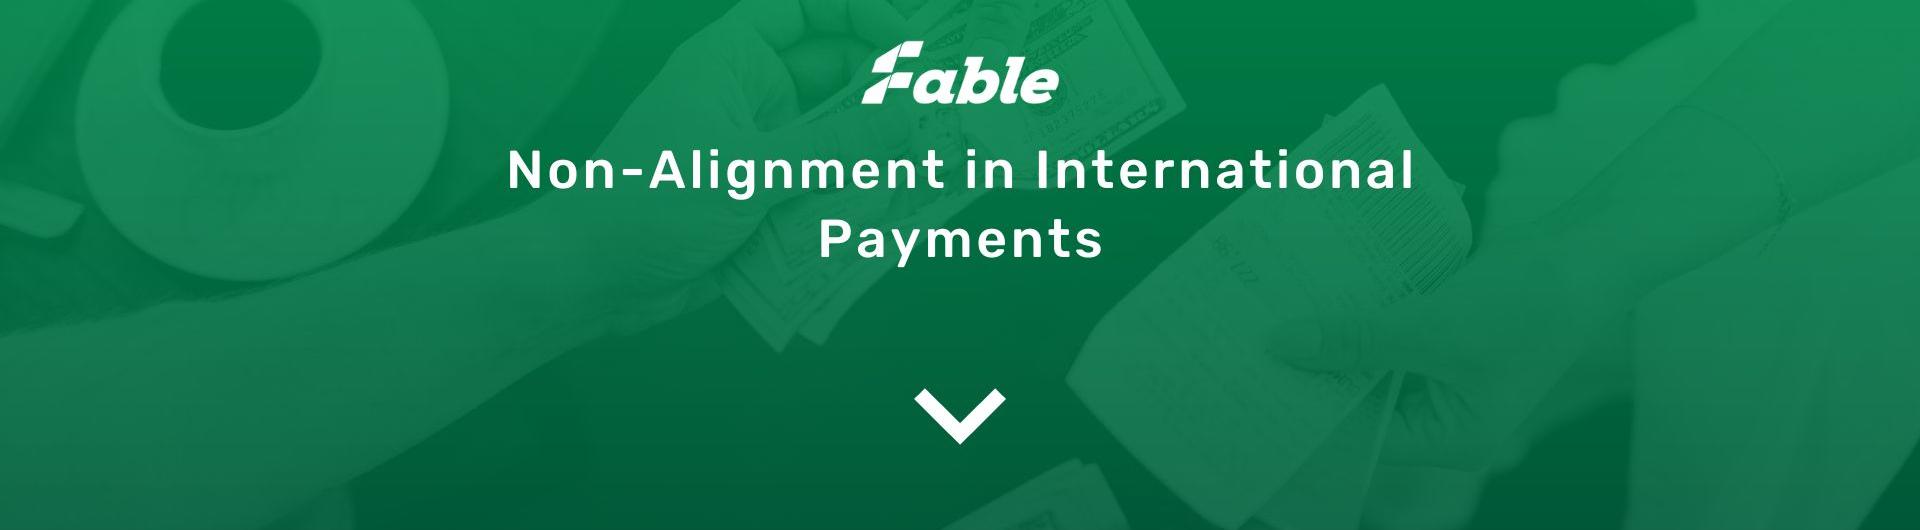 Non-Alignment Movement in International Payments